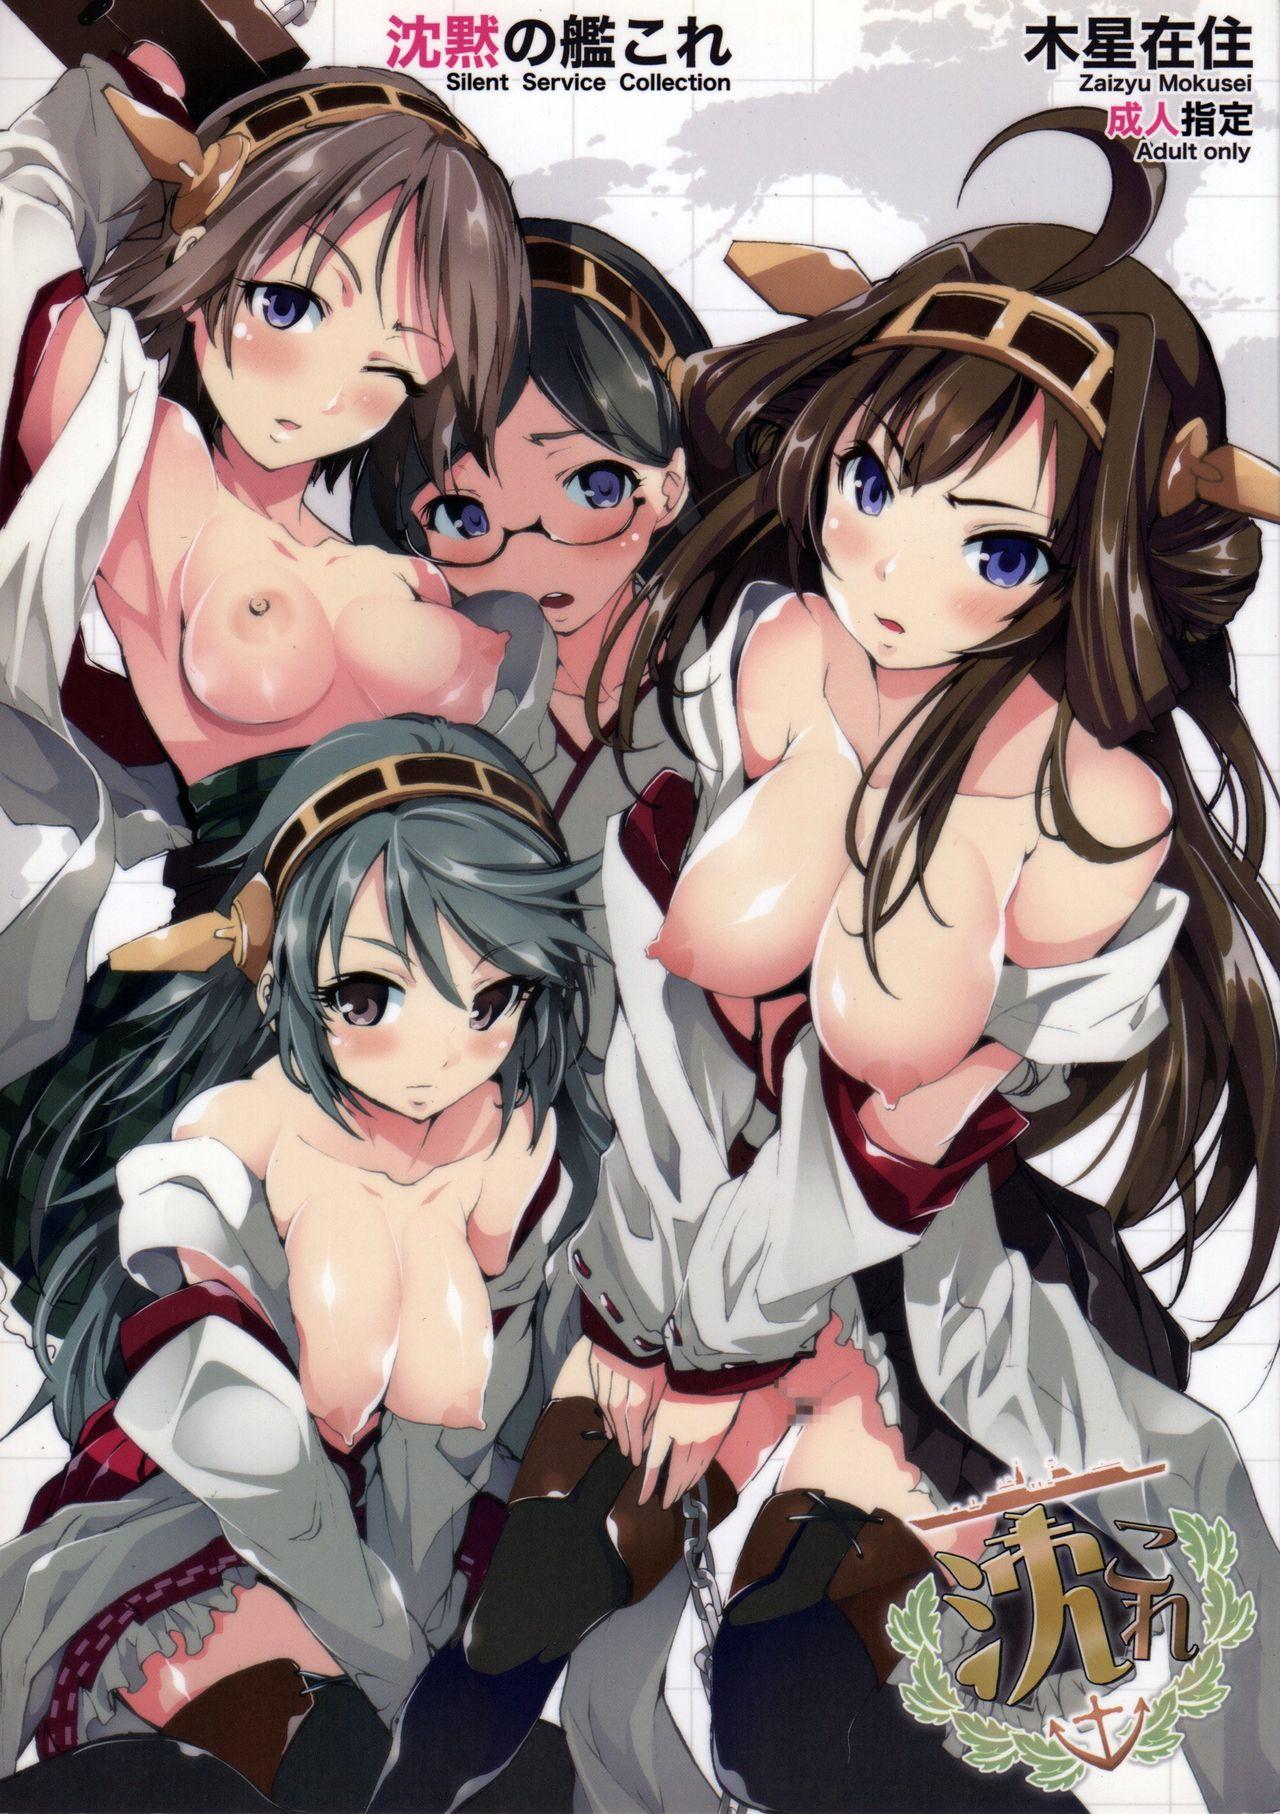 Free 18 Year Old Porn Chinmoku no KanColle - Silent Service Collection - Kantai collection Scissoring - Picture 1